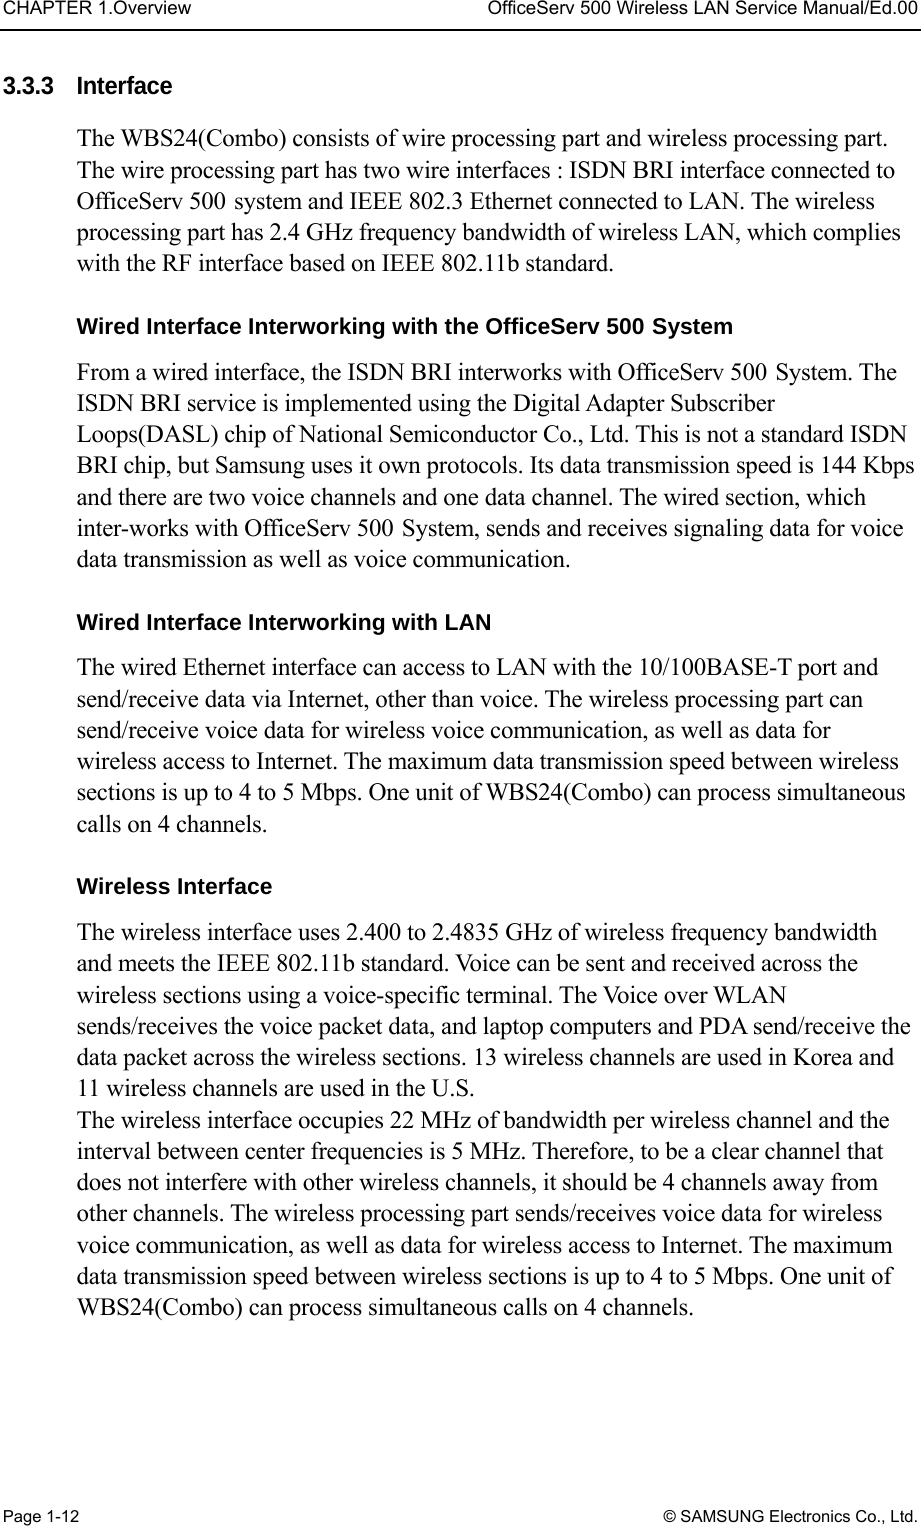 CHAPTER 1.Overview  OfficeServ 500 Wireless LAN Service Manual/Ed.00 Page 1-12 © SAMSUNG Electronics Co., Ltd. 3.3.3 Interface The WBS24(Combo) consists of wire processing part and wireless processing part. The wire processing part has two wire interfaces : ISDN BRI interface connected to OfficeServ 500 system and IEEE 802.3 Ethernet connected to LAN. The wireless processing part has 2.4 GHz frequency bandwidth of wireless LAN, which complies with the RF interface based on IEEE 802.11b standard.  Wired Interface Interworking with the OfficeServ 500 System From a wired interface, the ISDN BRI interworks with OfficeServ 500 System. The ISDN BRI service is implemented using the Digital Adapter Subscriber Loops(DASL) chip of National Semiconductor Co., Ltd. This is not a standard ISDN BRI chip, but Samsung uses it own protocols. Its data transmission speed is 144 Kbps and there are two voice channels and one data channel. The wired section, which inter-works with OfficeServ 500 System, sends and receives signaling data for voice data transmission as well as voice communication.    Wired Interface Interworking with LAN The wired Ethernet interface can access to LAN with the 10/100BASE-T port and send/receive data via Internet, other than voice. The wireless processing part can send/receive voice data for wireless voice communication, as well as data for wireless access to Internet. The maximum data transmission speed between wireless sections is up to 4 to 5 Mbps. One unit of WBS24(Combo) can process simultaneous calls on 4 channels.    Wireless Interface The wireless interface uses 2.400 to 2.4835 GHz of wireless frequency bandwidth and meets the IEEE 802.11b standard. Voice can be sent and received across the wireless sections using a voice-specific terminal. The Voice over WLAN sends/receives the voice packet data, and laptop computers and PDA send/receive the data packet across the wireless sections. 13 wireless channels are used in Korea and 11 wireless channels are used in the U.S.   The wireless interface occupies 22 MHz of bandwidth per wireless channel and the interval between center frequencies is 5 MHz. Therefore, to be a clear channel that does not interfere with other wireless channels, it should be 4 channels away from other channels. The wireless processing part sends/receives voice data for wireless voice communication, as well as data for wireless access to Internet. The maximum data transmission speed between wireless sections is up to 4 to 5 Mbps. One unit of WBS24(Combo) can process simultaneous calls on 4 channels.  